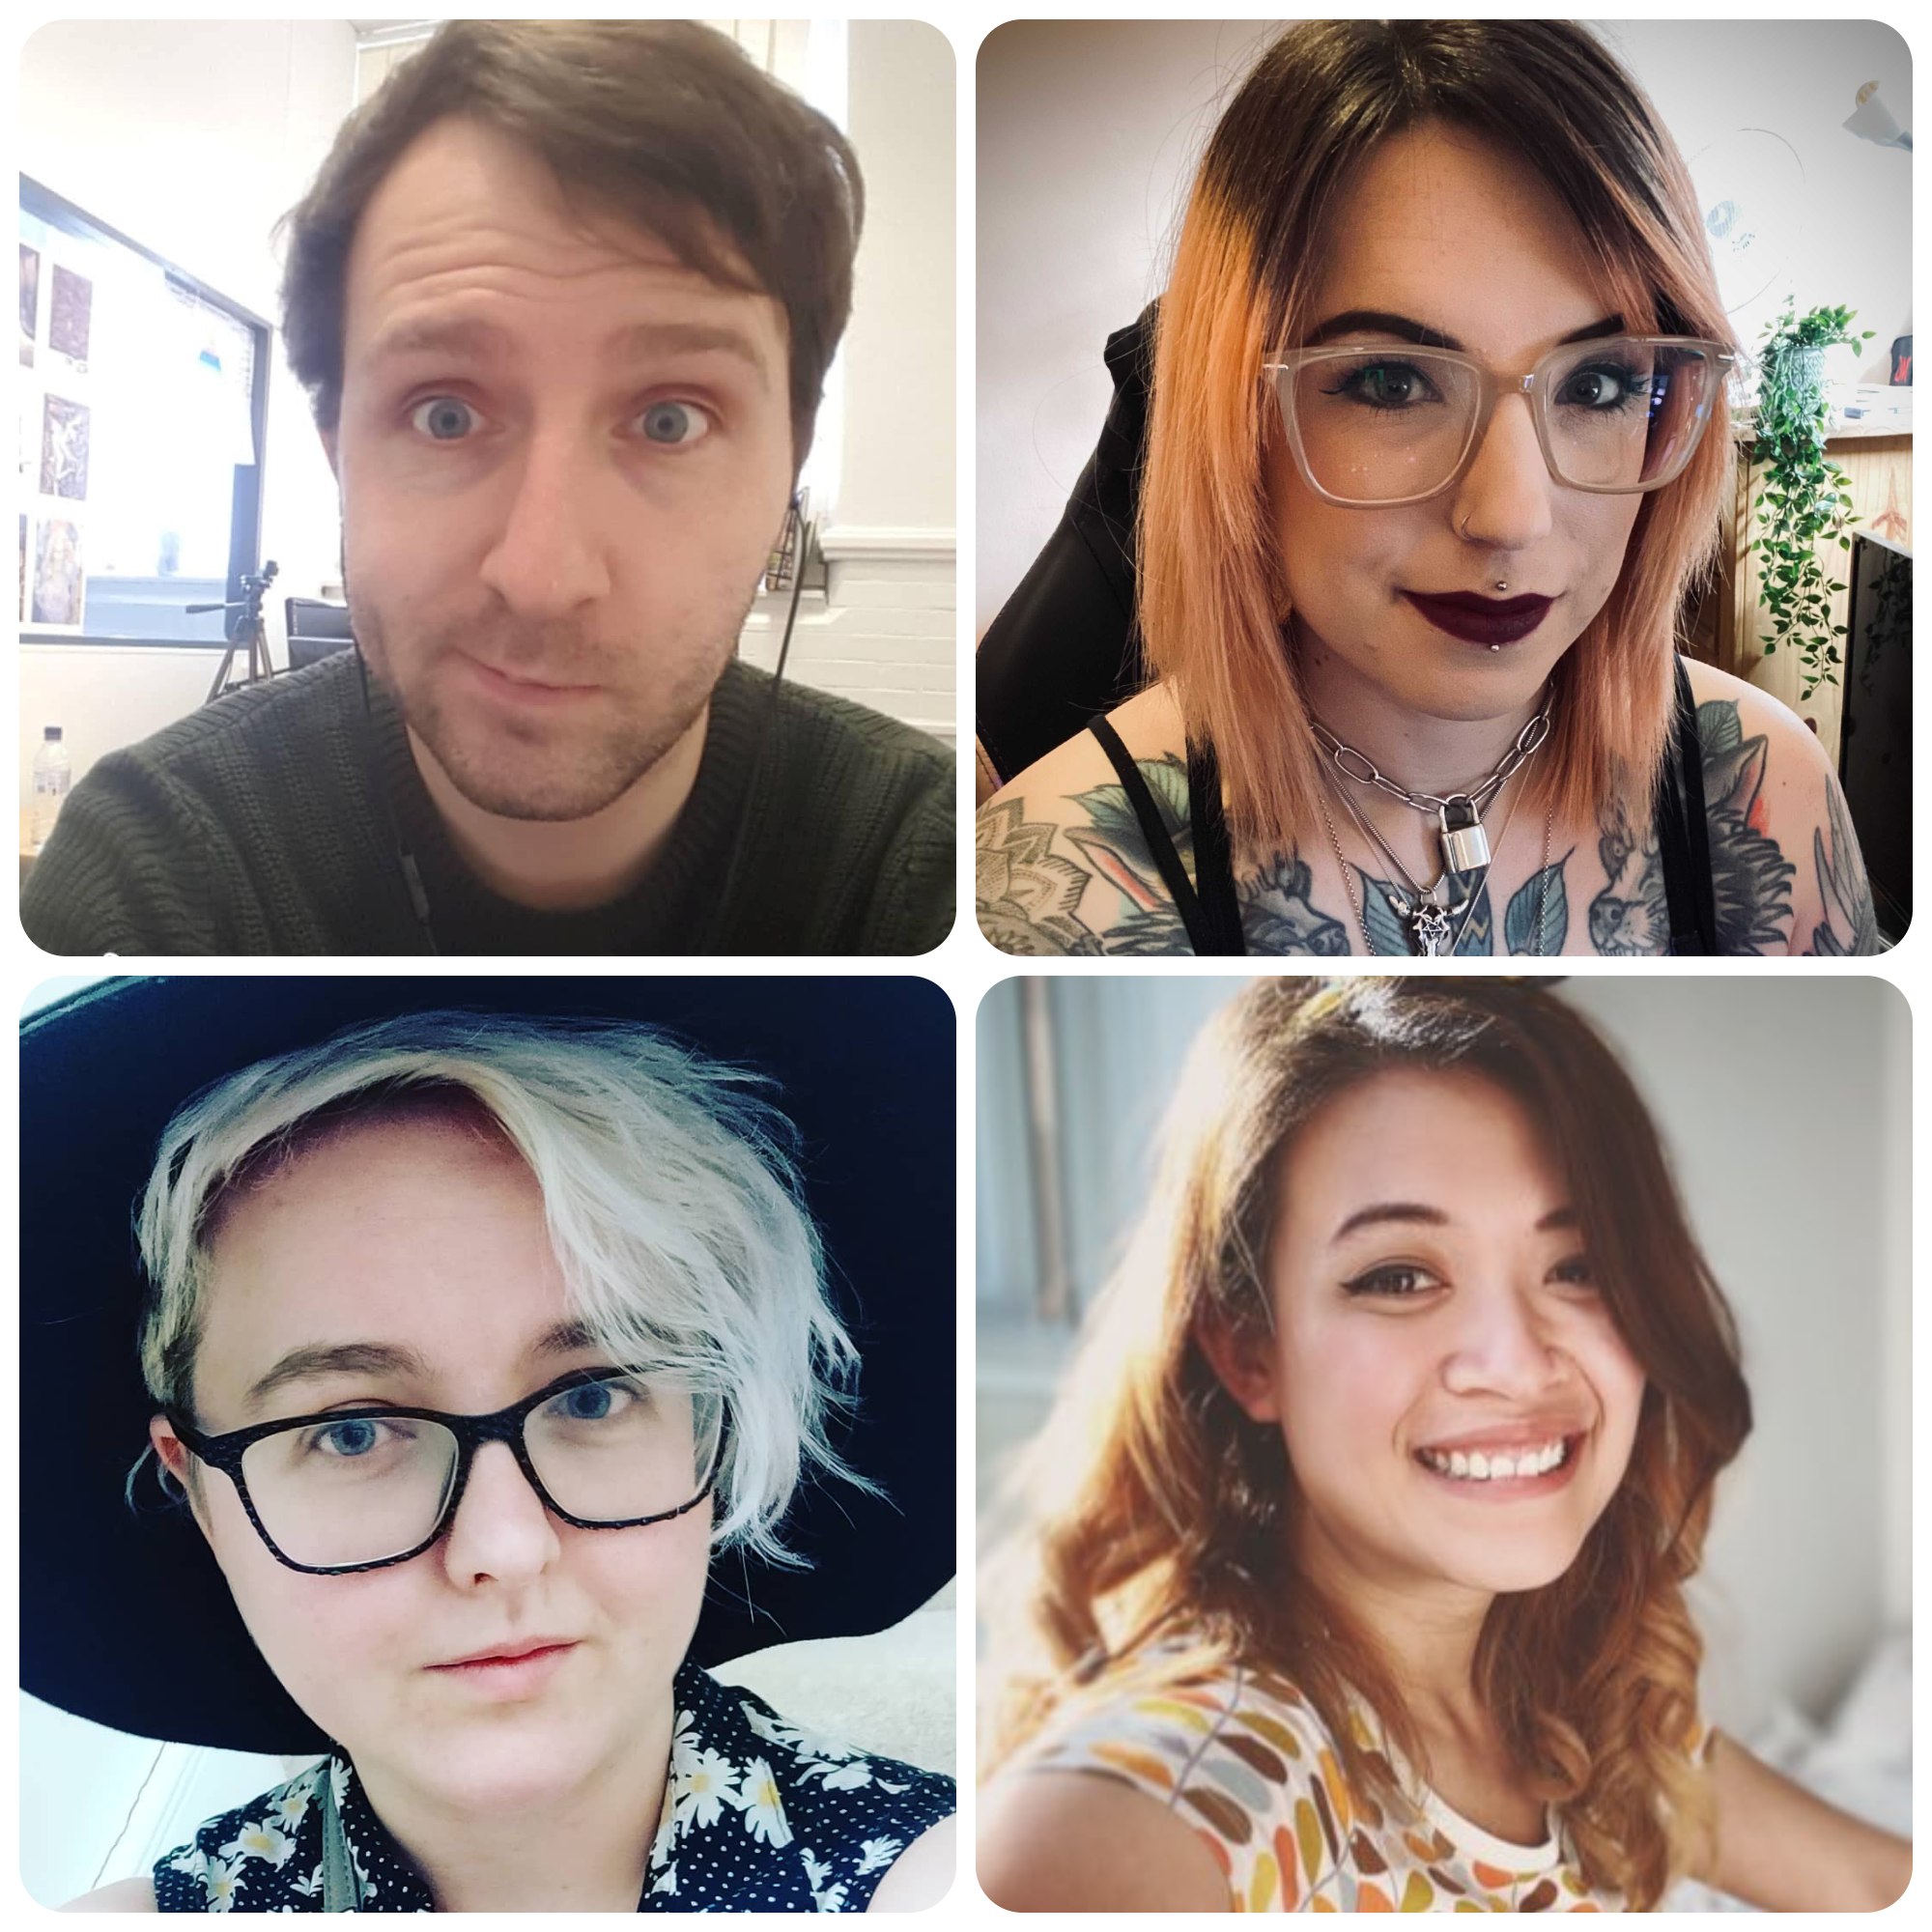 Featured in the showcase will be a panel session of expert professionals discussing representation in games - from left to right in descending order:&nbsp;Chris Goodyear (Founder of Many Cats Studios CIC), Sarah Dyer (Community Manager at Splash Damage), Kat Welsford (Digital Analyst at Square Enix Europe) and Anisa Sanusi (UI/UX Designer at Roll7 and Founder of Limit Break Mentorship).